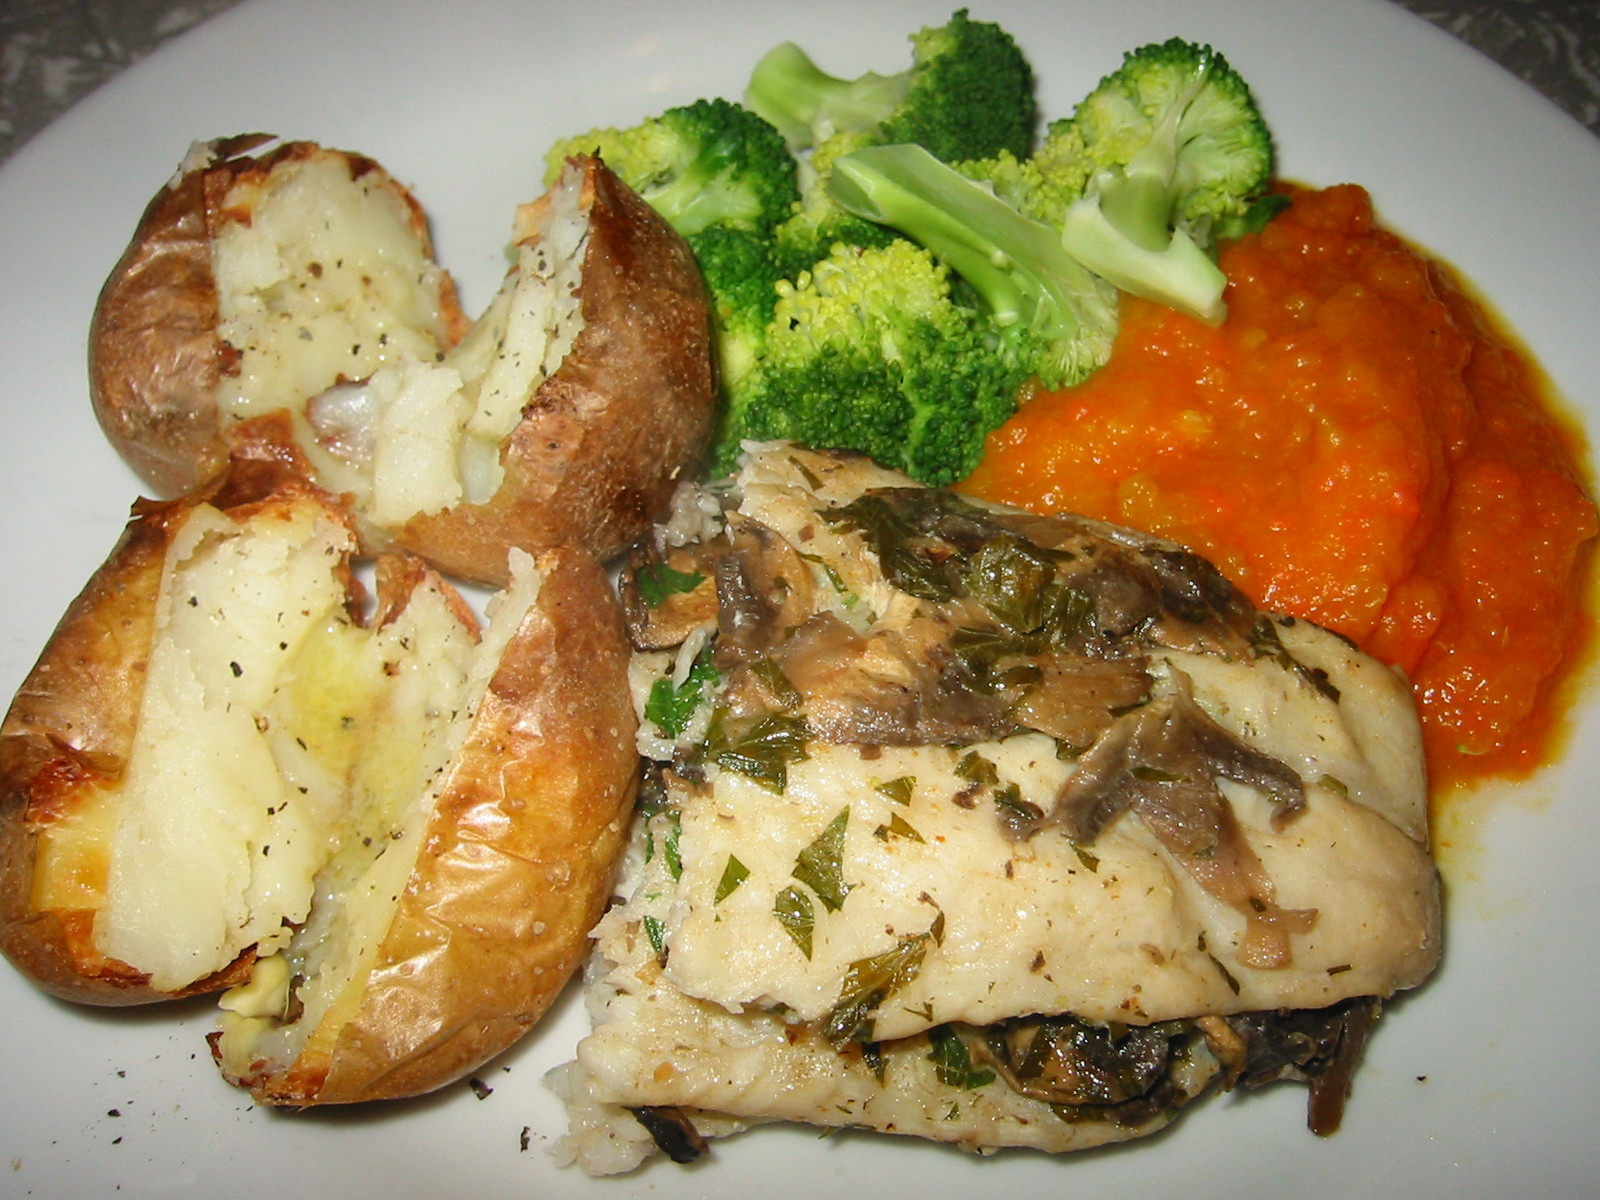 Oven baked fish and vegetables